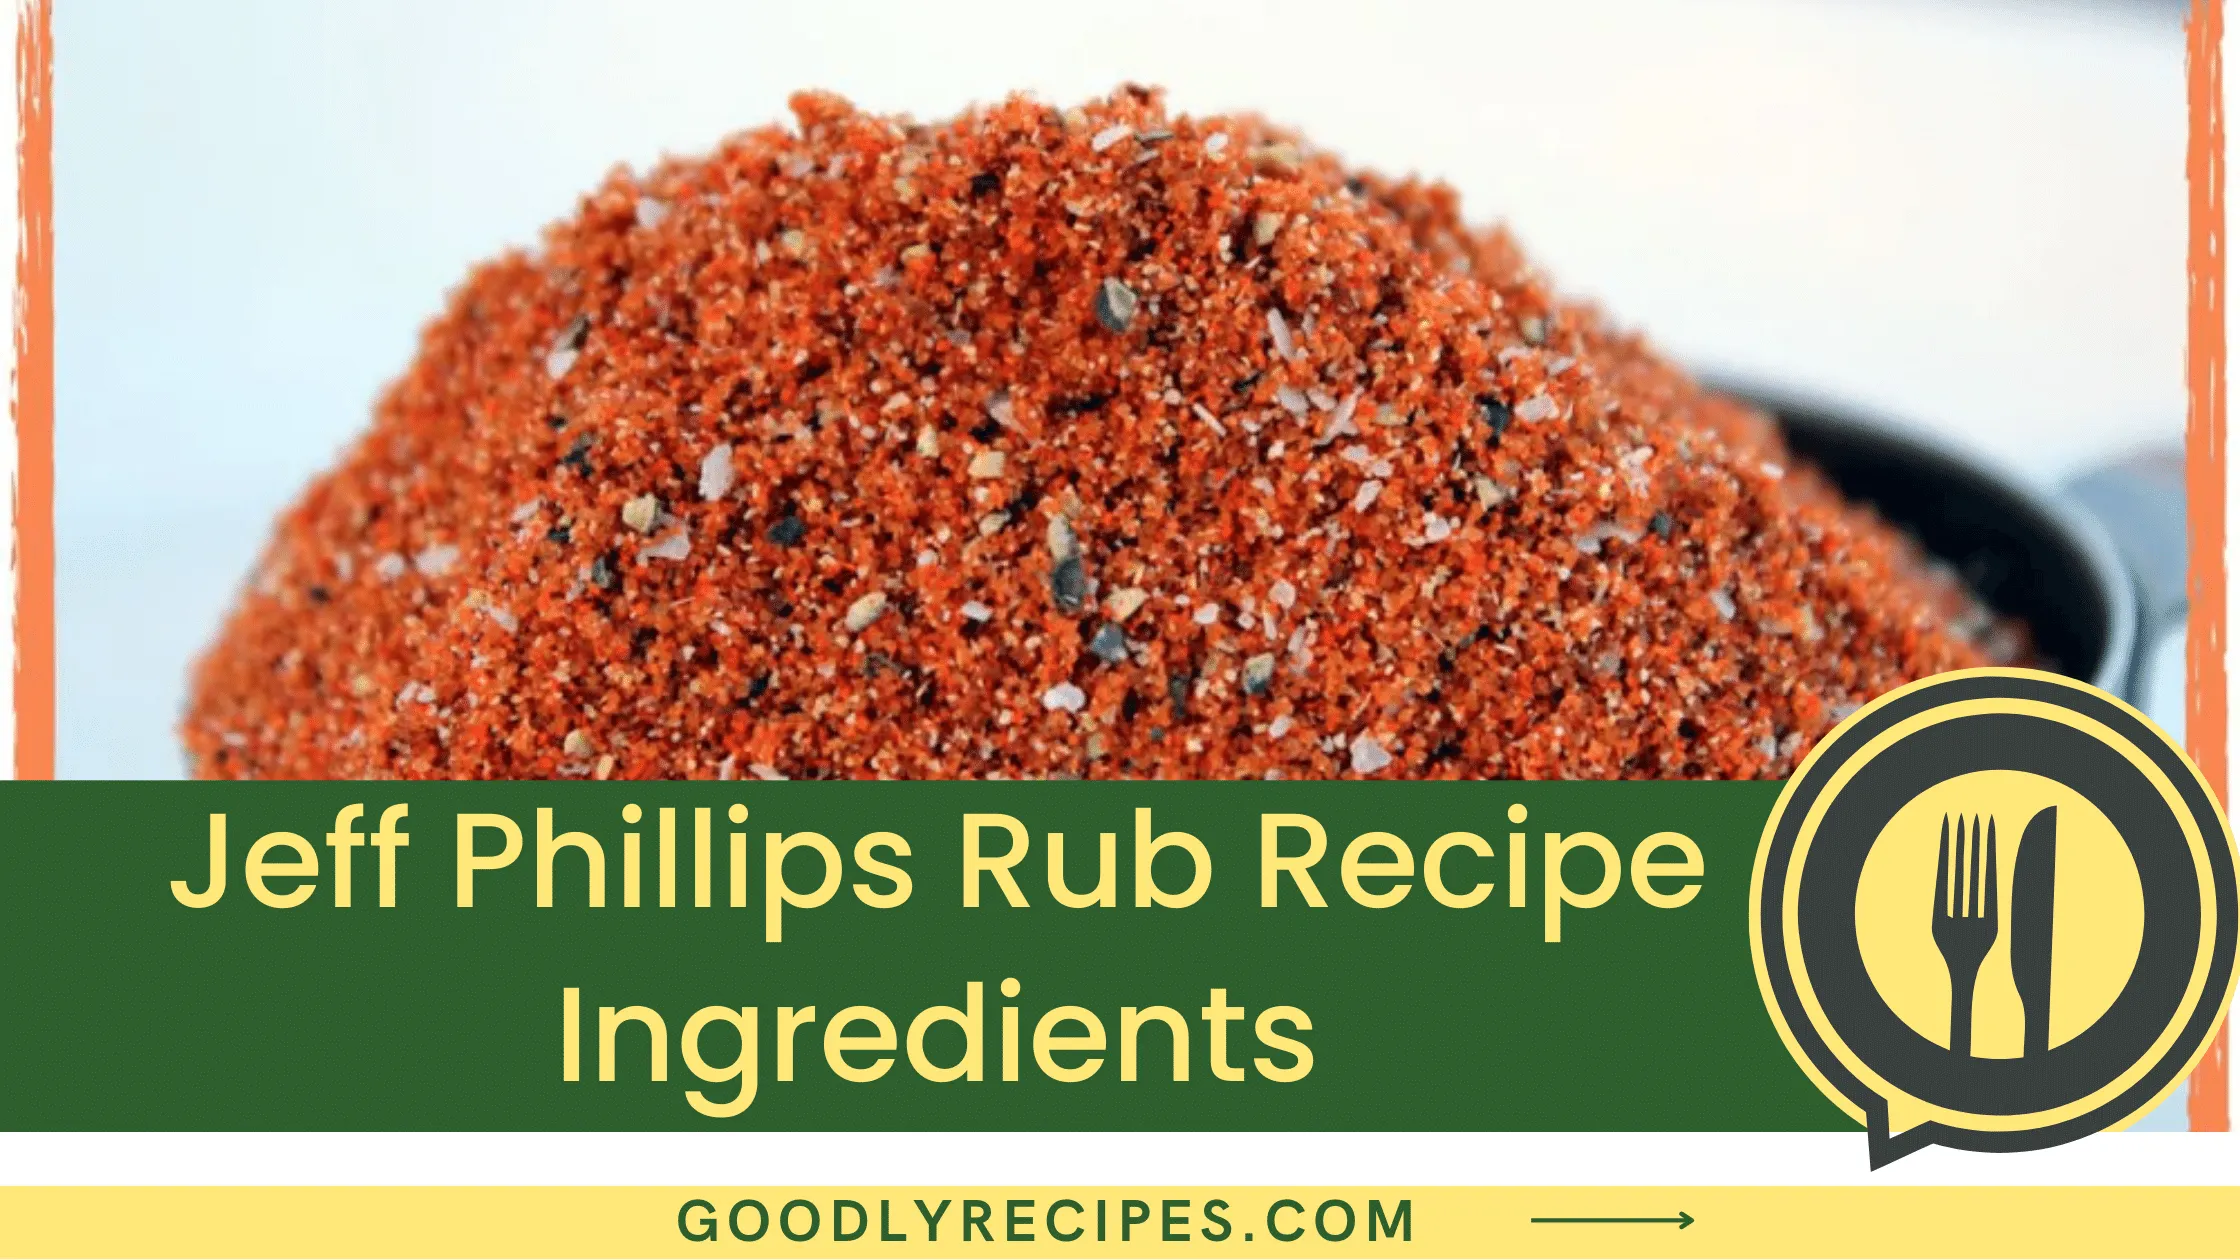 What Is Jeff Phillips Rub?